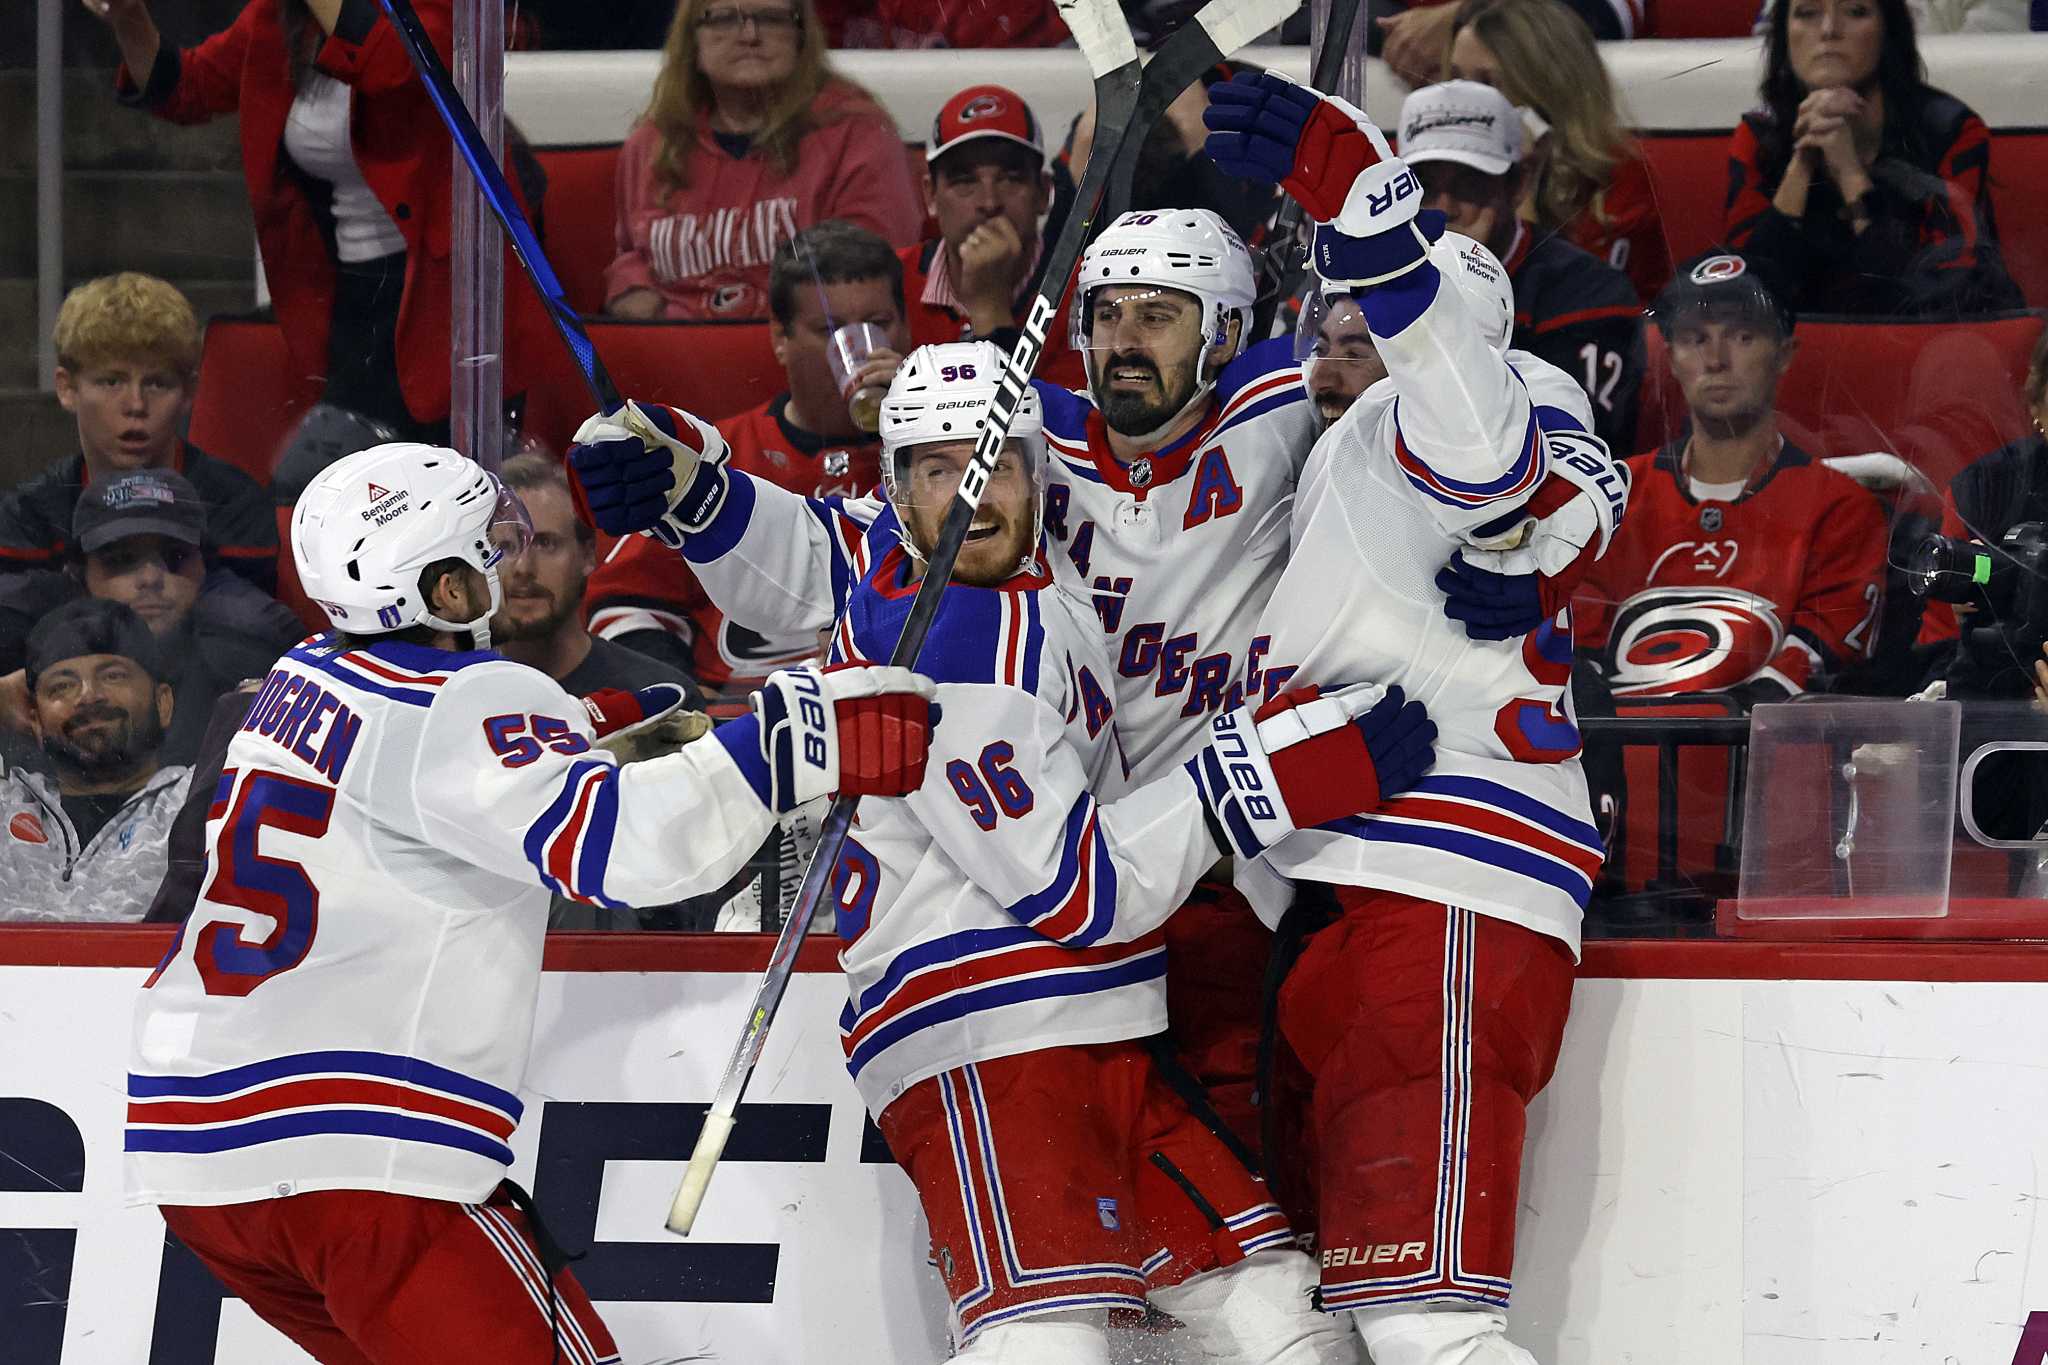 Kreider pushes Rangers to the NHL's Eastern Conference Final for the 2nd time in 3 postseasons